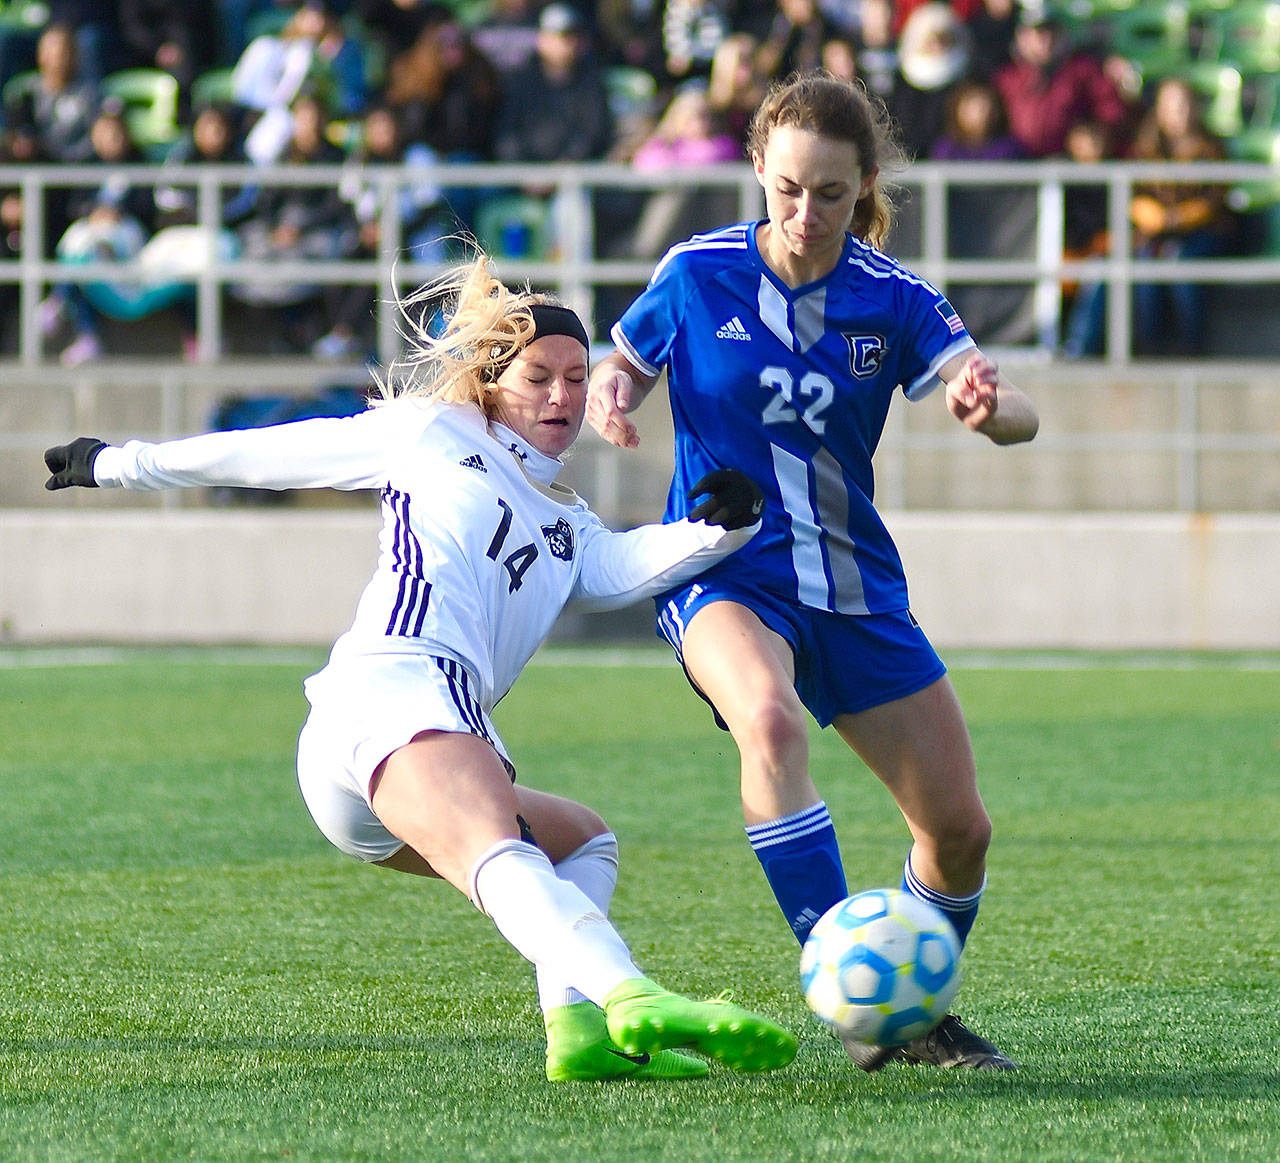 Peninsula Taylor Graham battles for a loose ball with Clark’s Julie Williams in the NWAC championship match in Tukwila Sunday. The Peninsula women won 2-0 to win the NWAC championship. (Jay Cline)